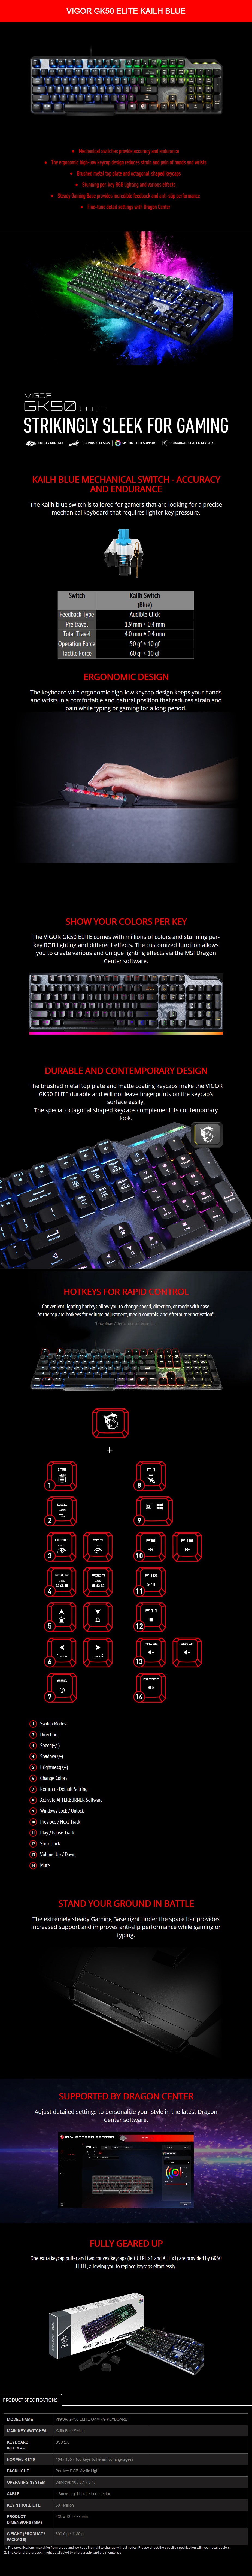 A large marketing image providing additional information about the product MSI Vigor GK50 Elite RGB Mechanical Gaming Keyboard - Kailh Blue - Additional alt info not provided